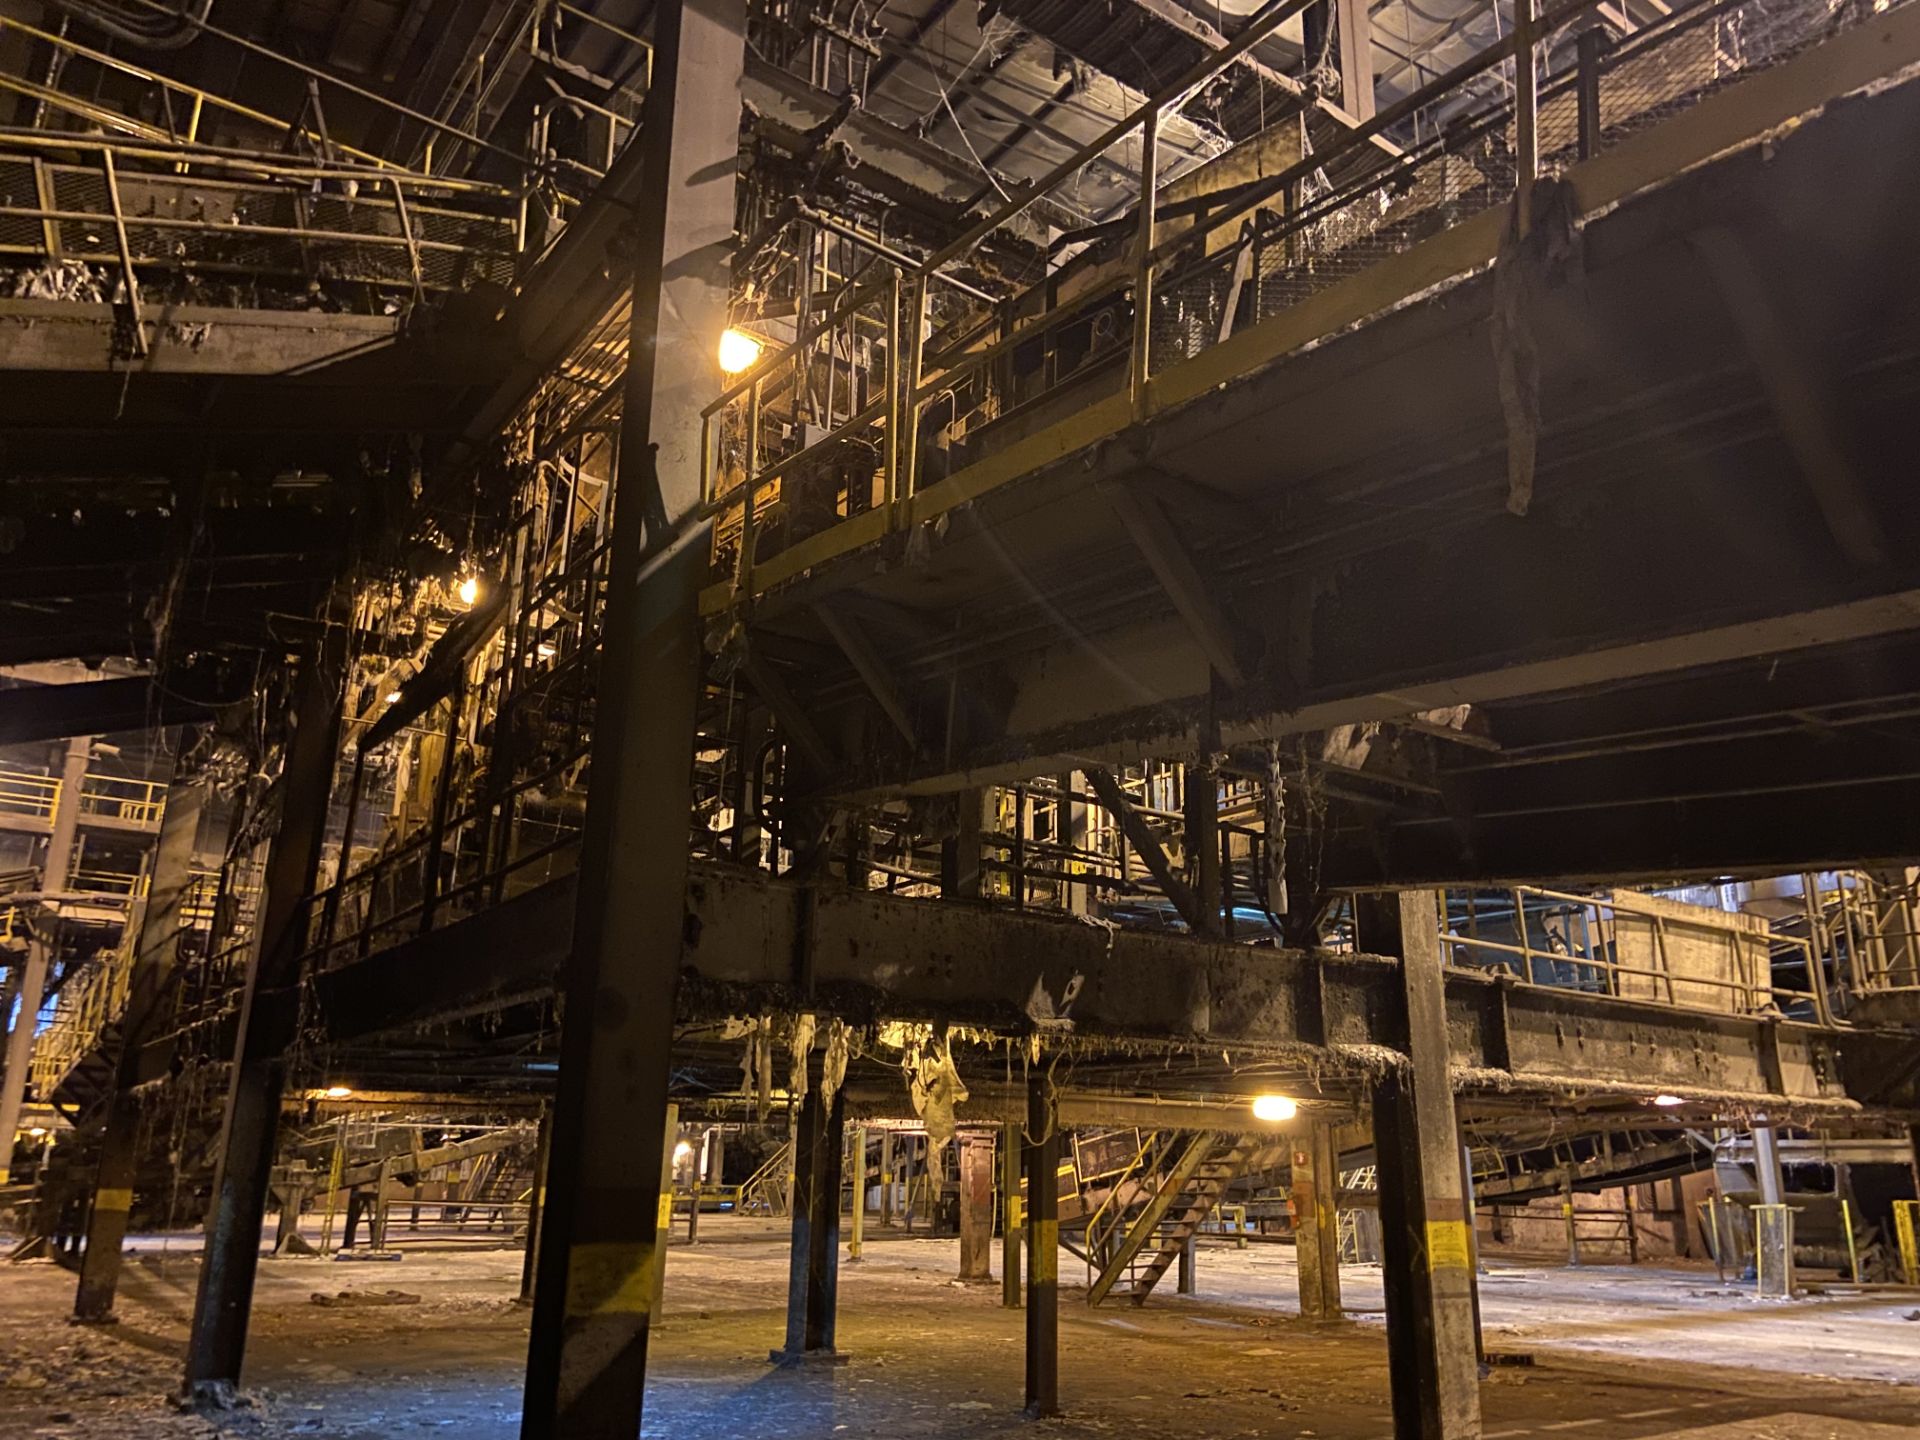 Mezzanines and Connected Conveyor (Cut off at Building Exterior), Rigging Fee: $25,000 - Image 6 of 11